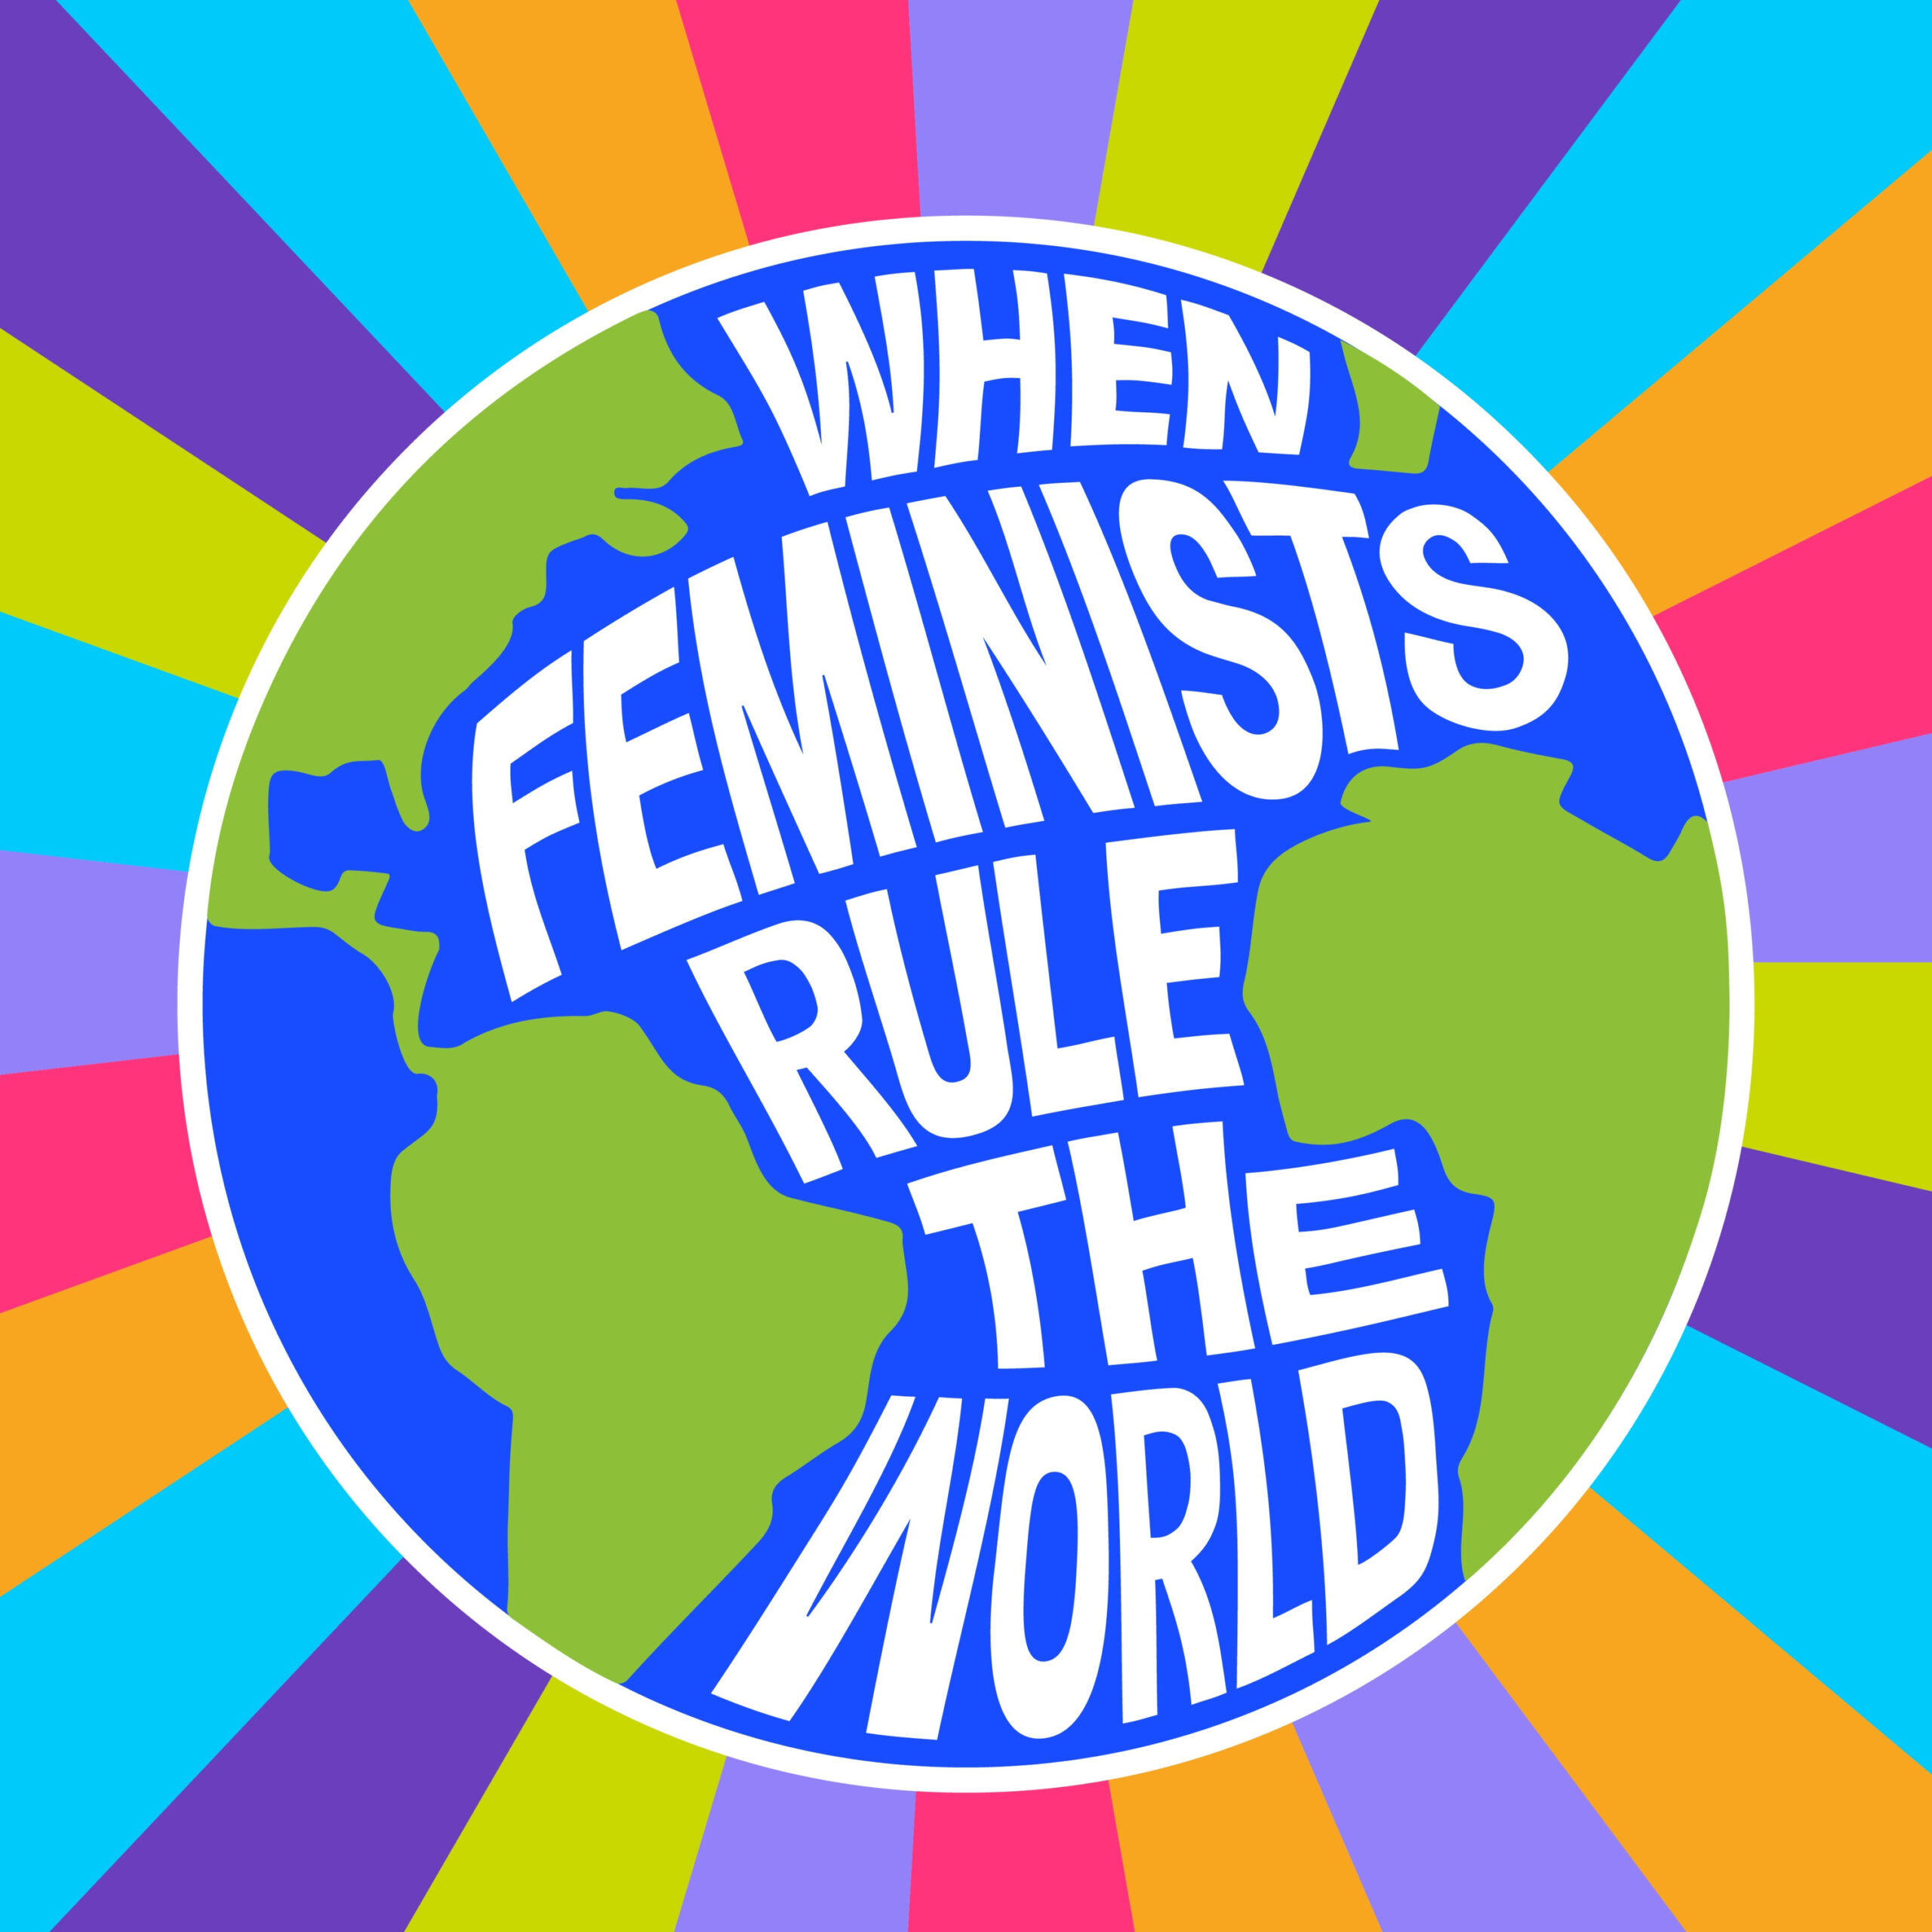 When Feminists Rule the World